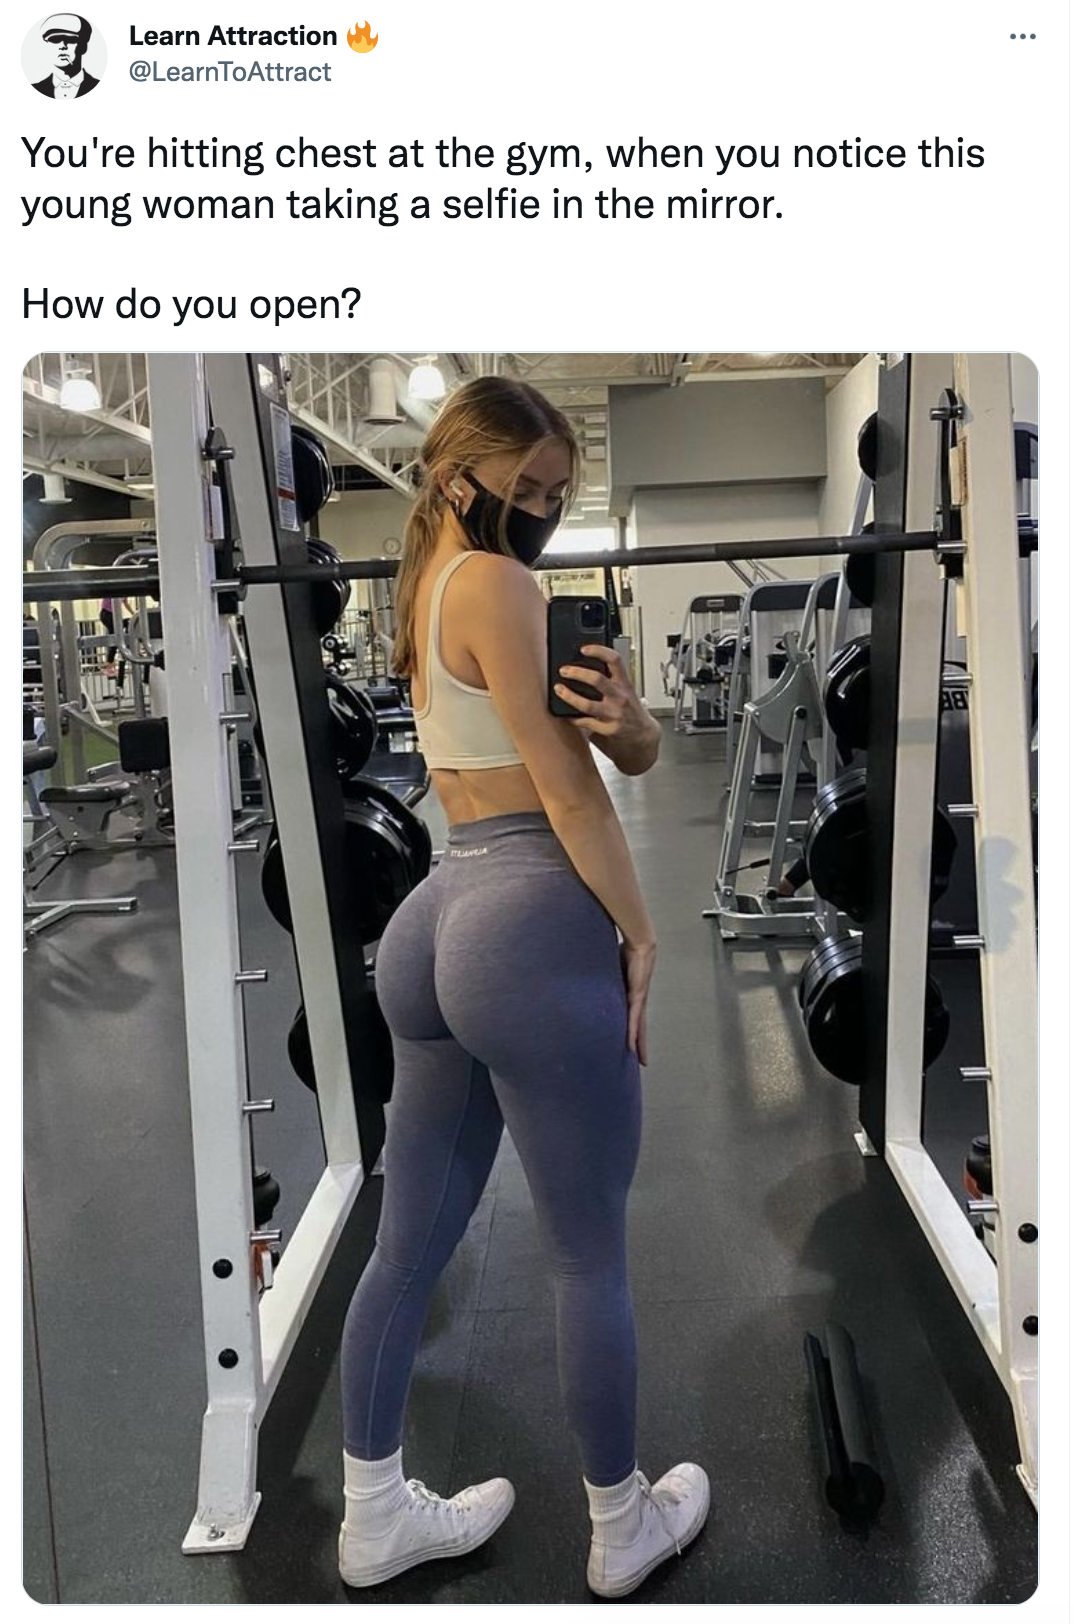 how would you open --  @katecraigwellness - Learn Attraction LearnToAttract You're hitting chest at the gym, when you notice this young woman taking a selfie in the mirror. How do you open?